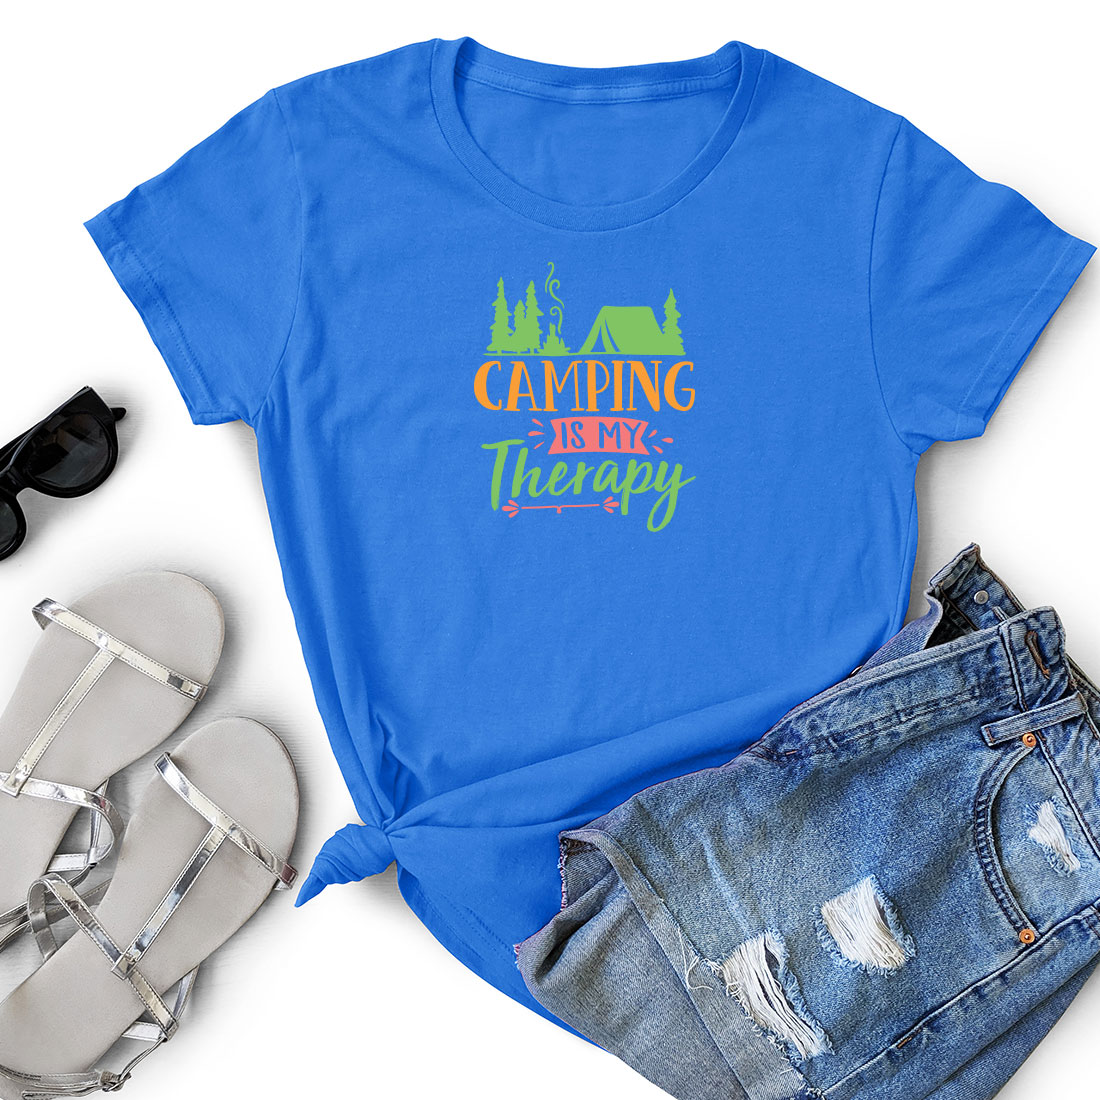 T - shirt that says camping is a therapy.